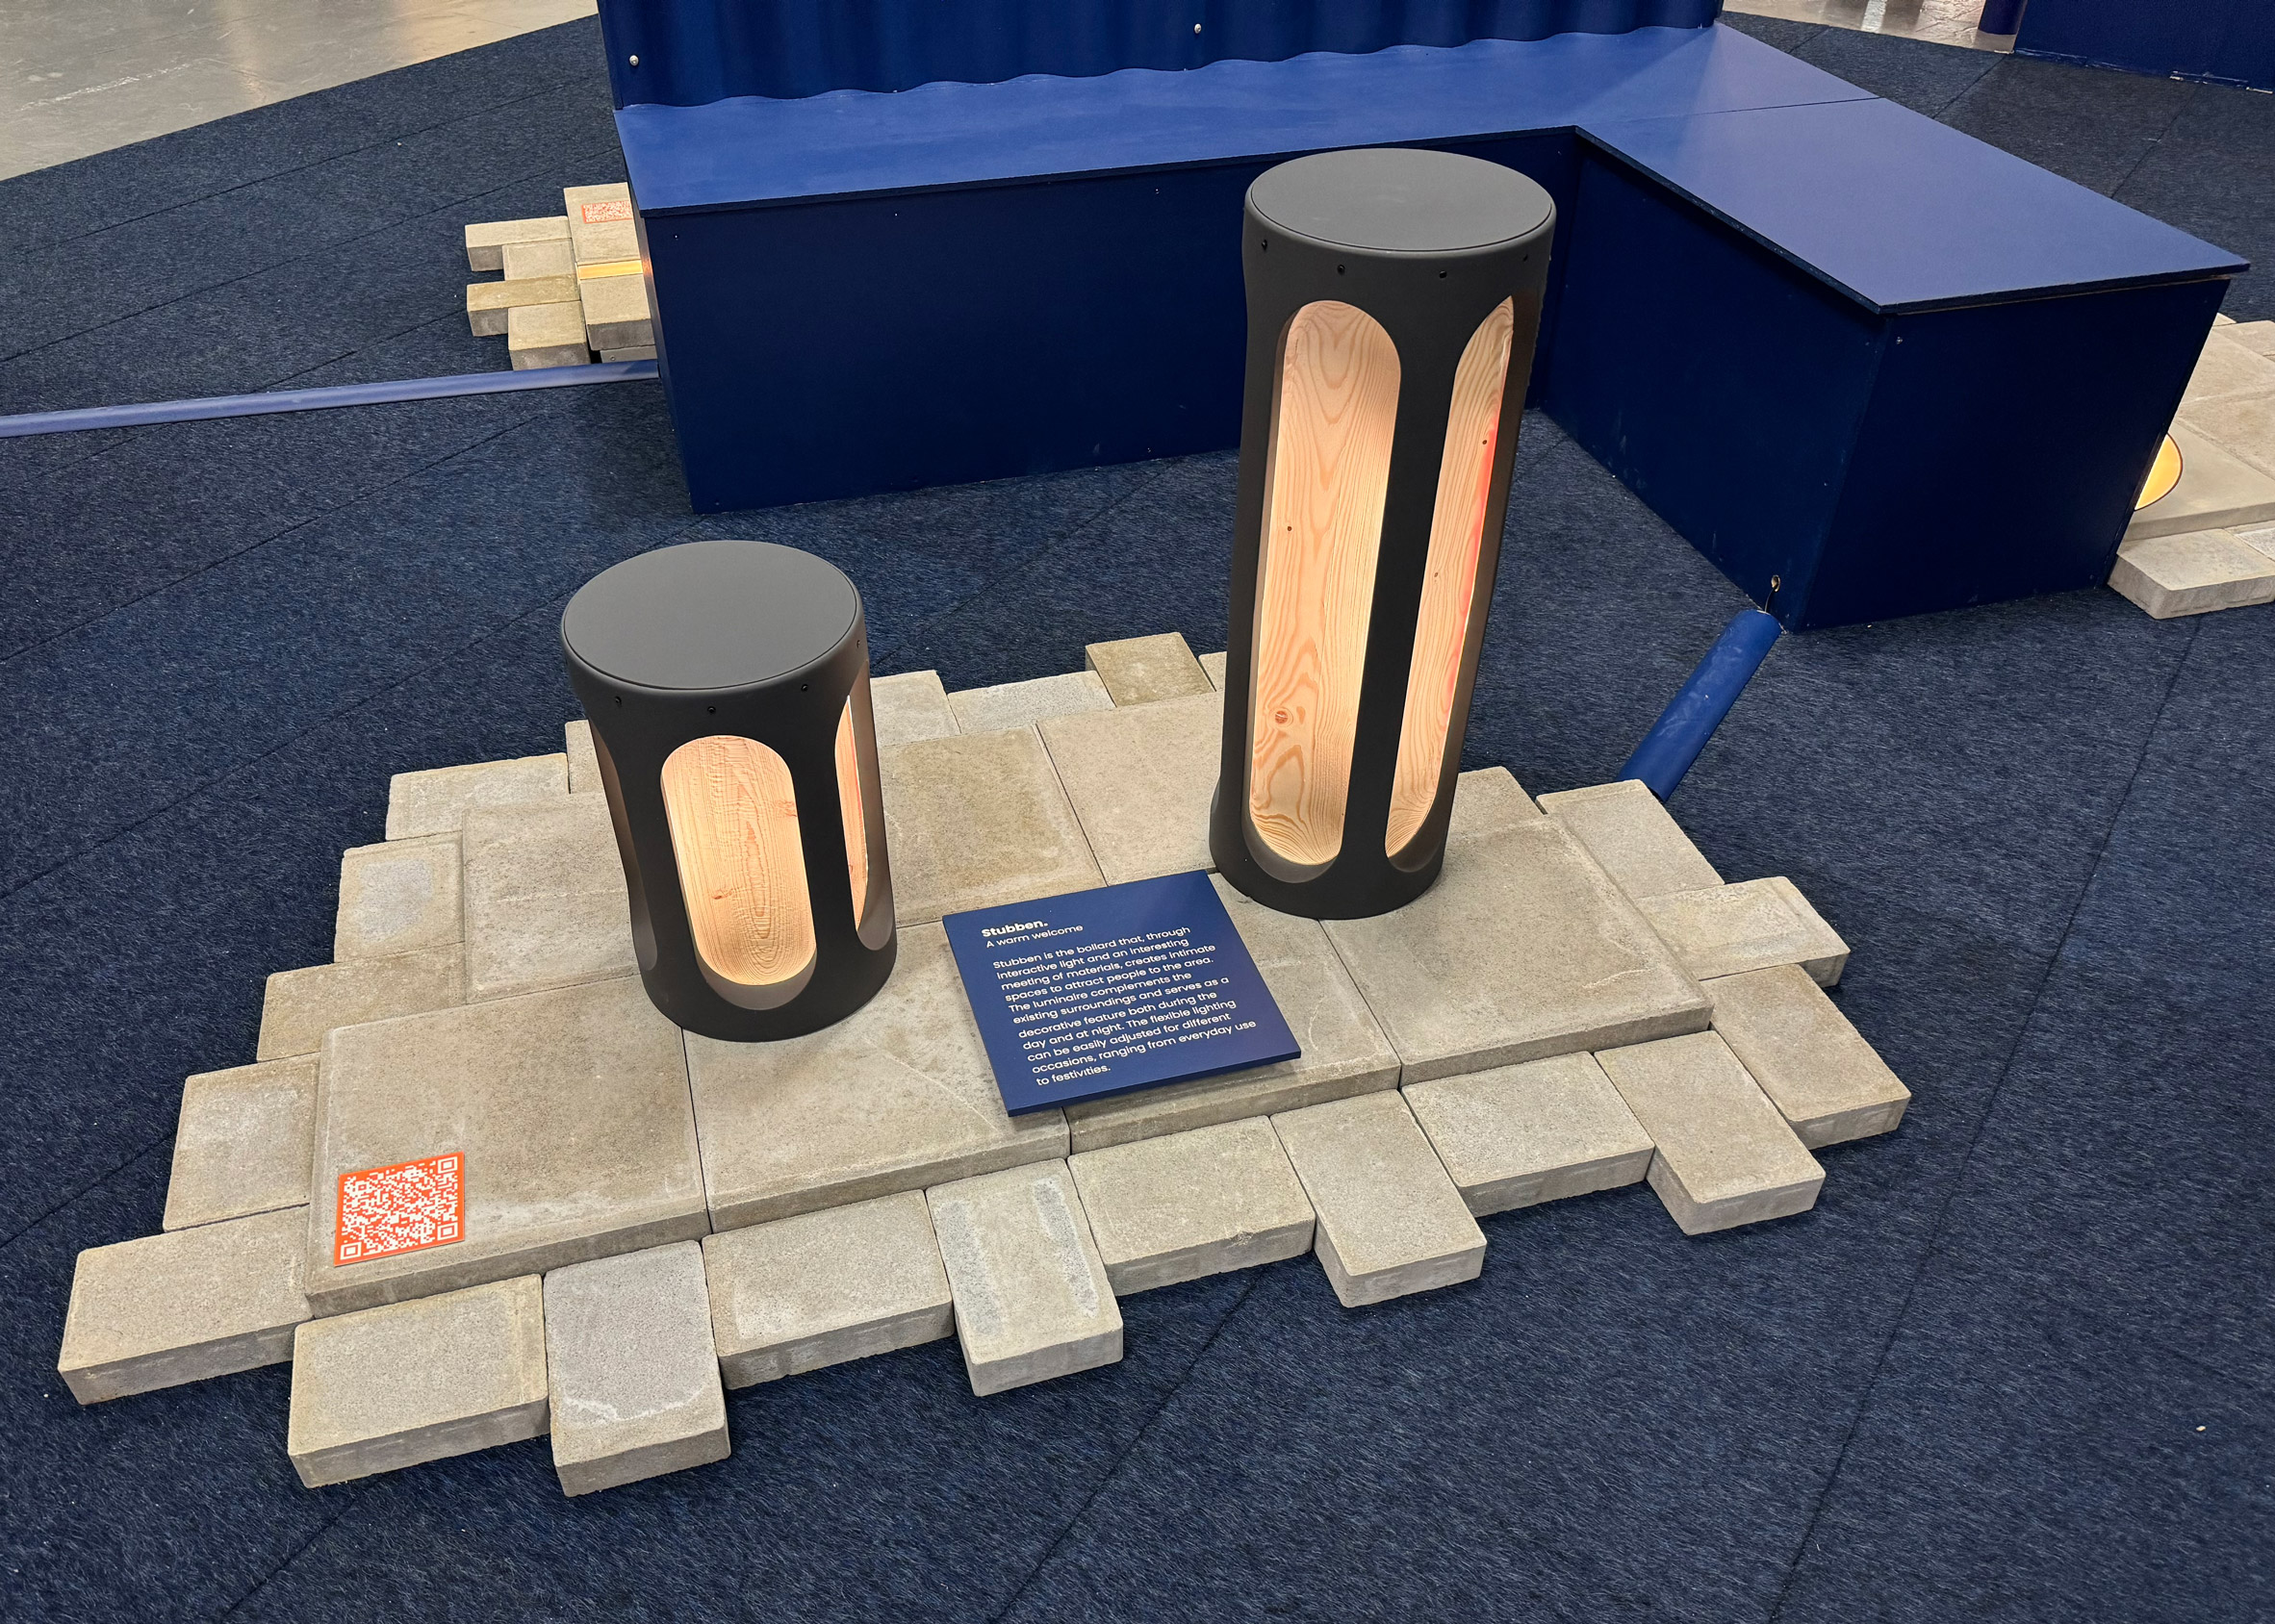 Luminaire student project on display